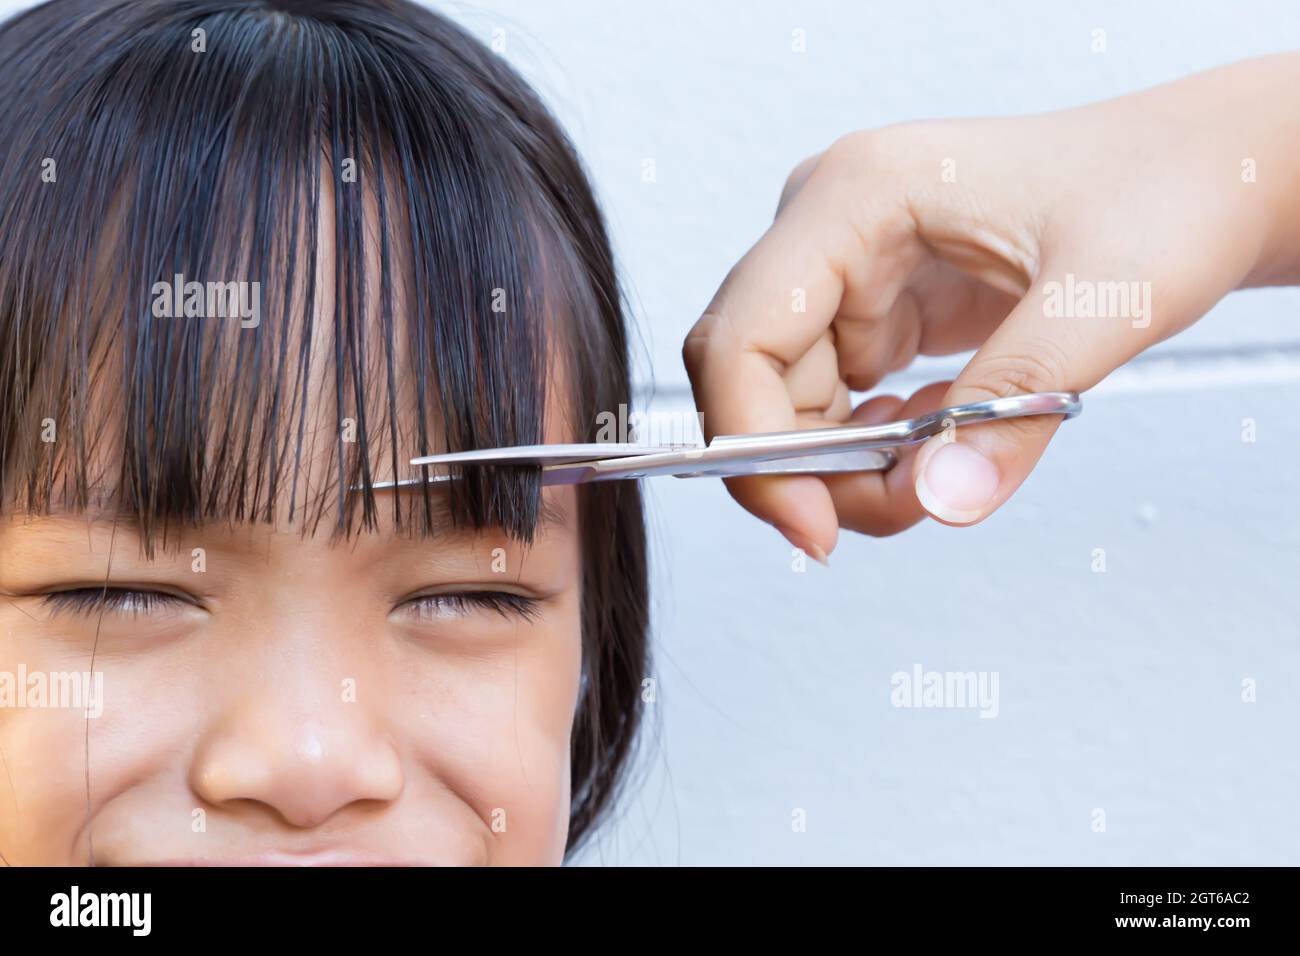 Cropped Hand Cutting Girl Hair Stock Photo - Alamy